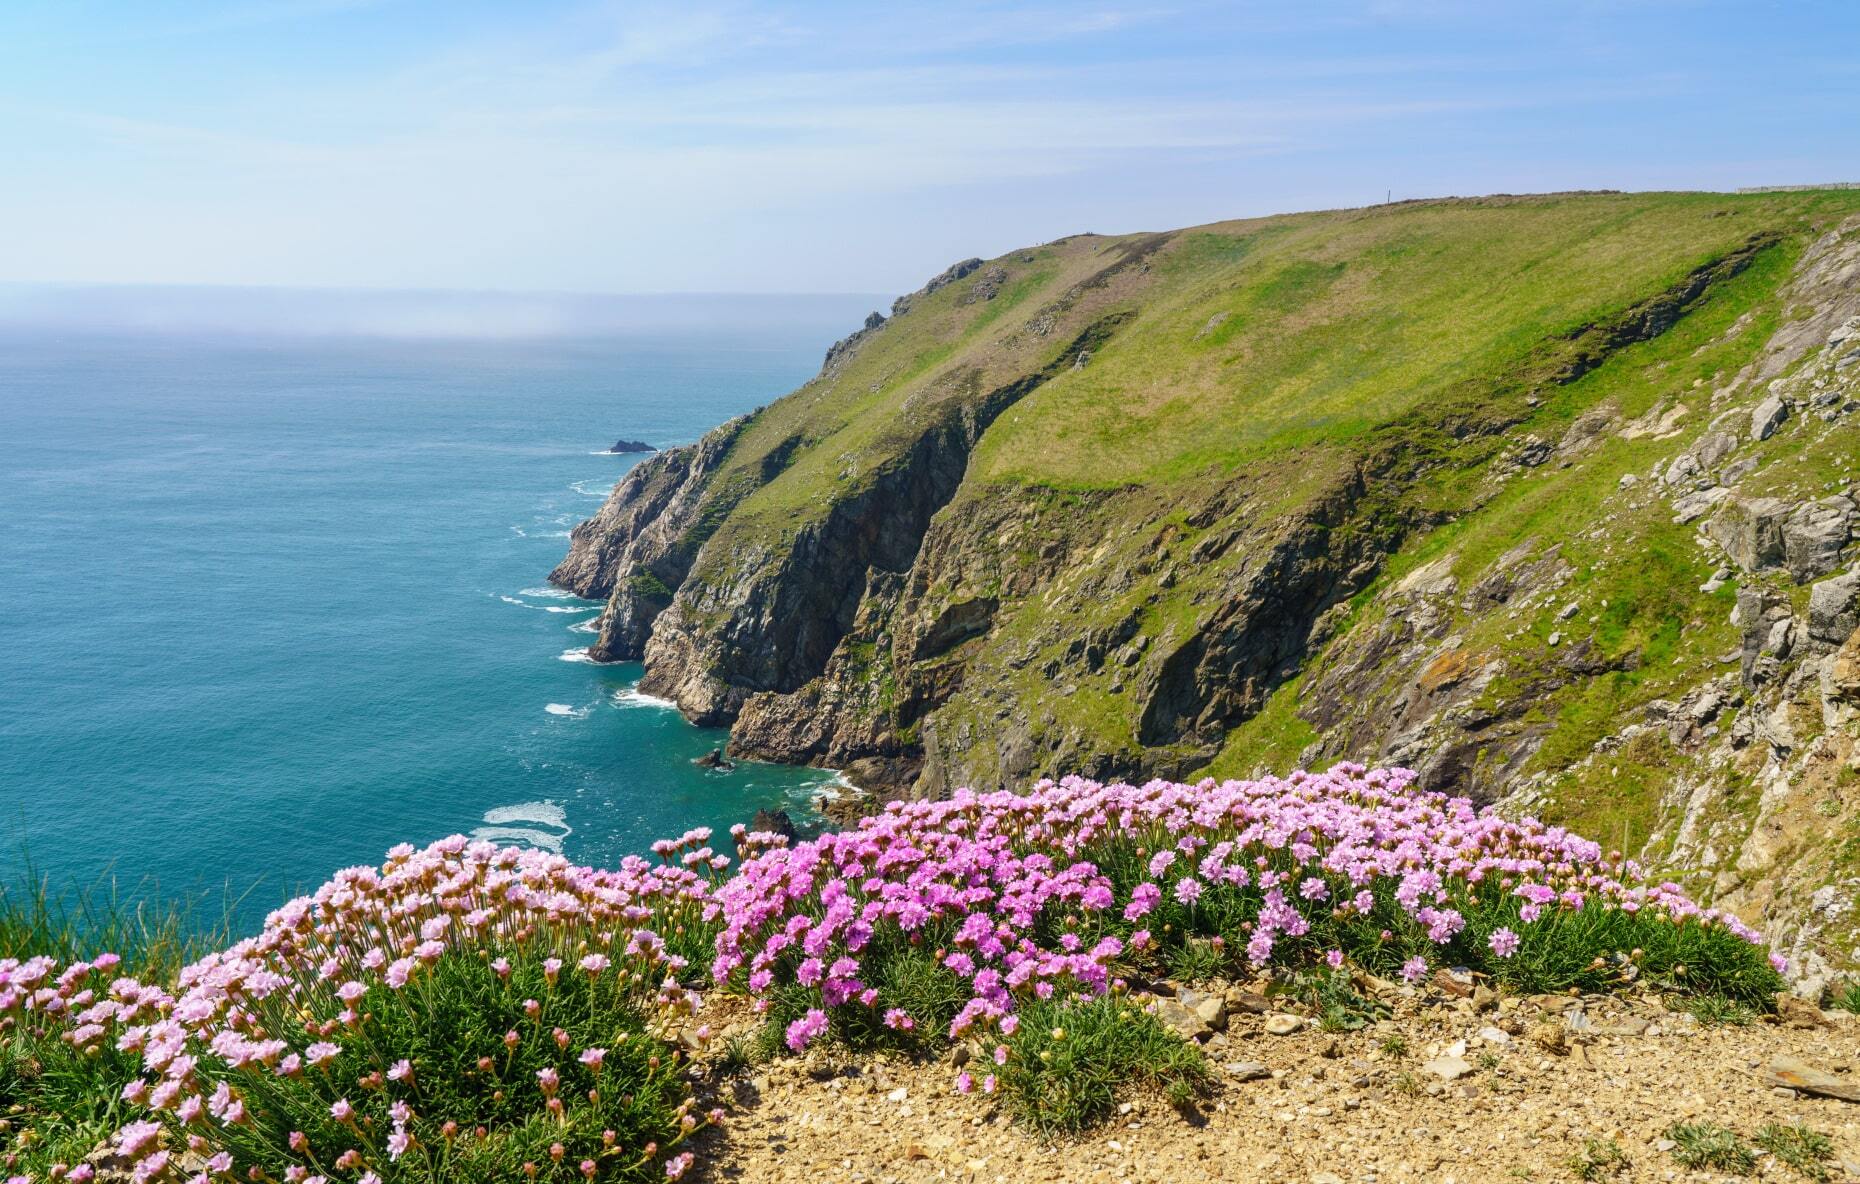 <p>Off the coast of Devon, <a href="https://www.landmarktrust.org.uk/lundyisland/" class="atom_link atom_valid" rel="noreferrer noopener">Lundy Island</a> is where the Bristol Channel meets the Atlantic Ocean. Once occupied by pirates, the island is now owned by the National Trust and is rich in flora and fauna. Among other wildlife, it’s populated by many adorable puffins.</p>